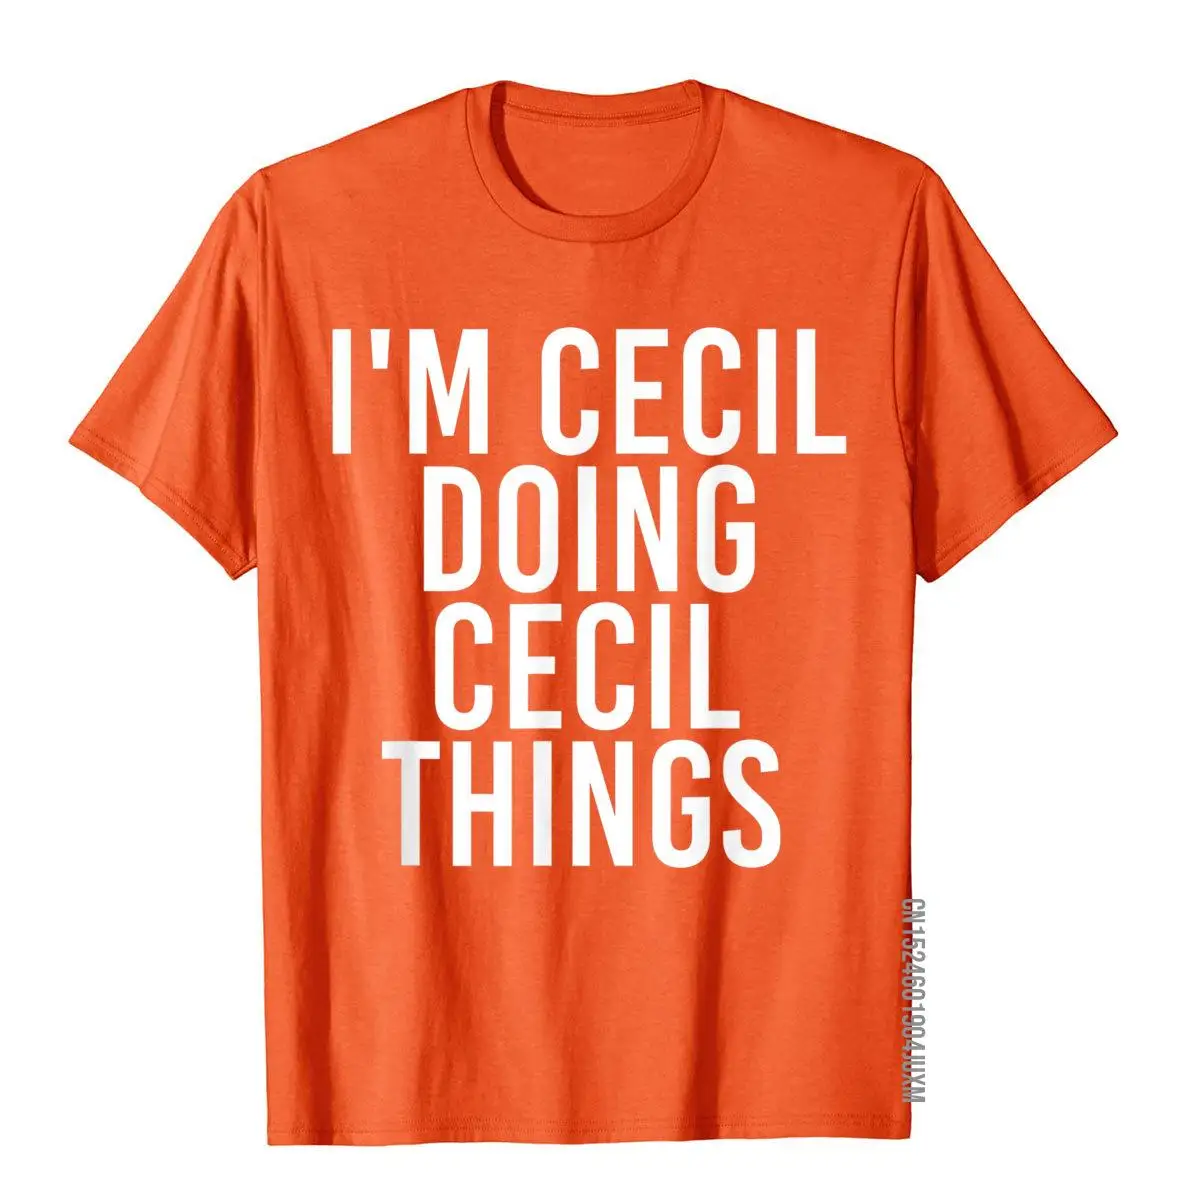 I'm CECIL DOING CECIL THINGS Shirt Funny Christmas Gift Idea Top T-Shirts  Fitted Cotton Student Tops & Tees Chinese Style - AliExpress